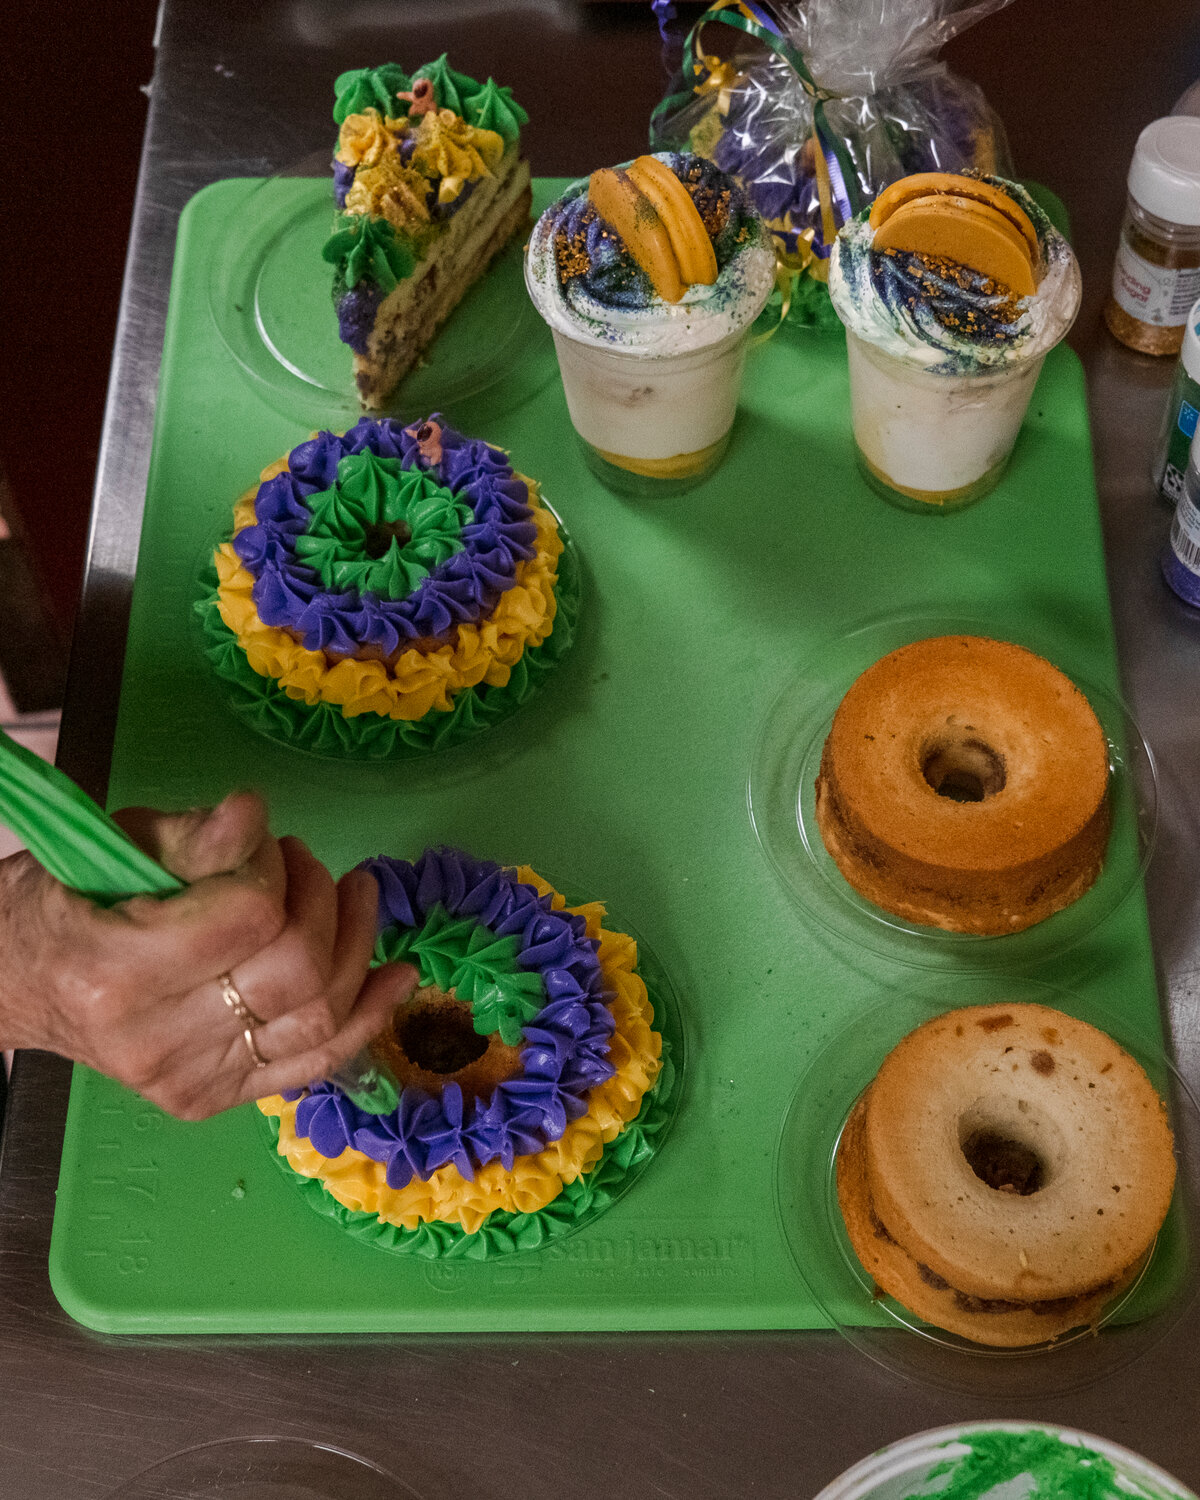 Sonja Dowdle decorates a king cake pound cake at Market By The Bay.